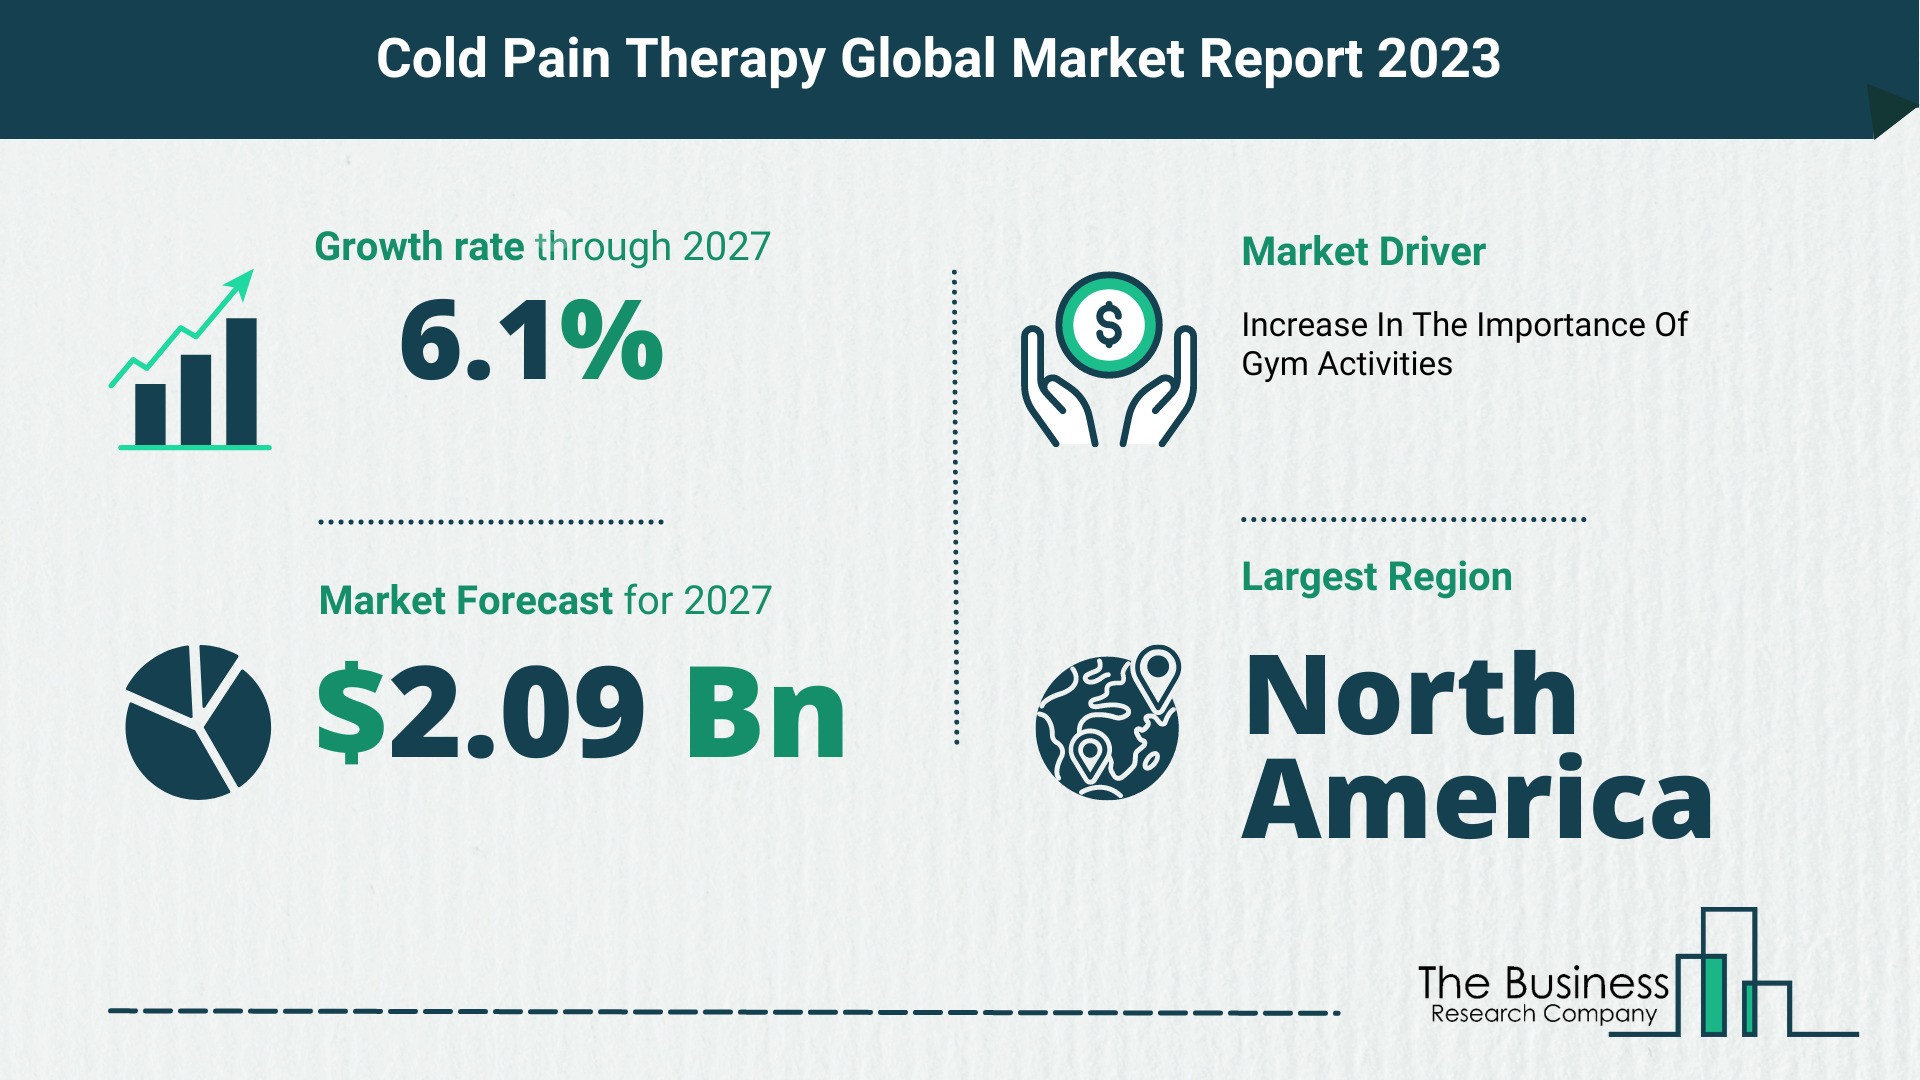 Cold Pain Therapy Market Size, Share, And Growth Rate Analysis 2023